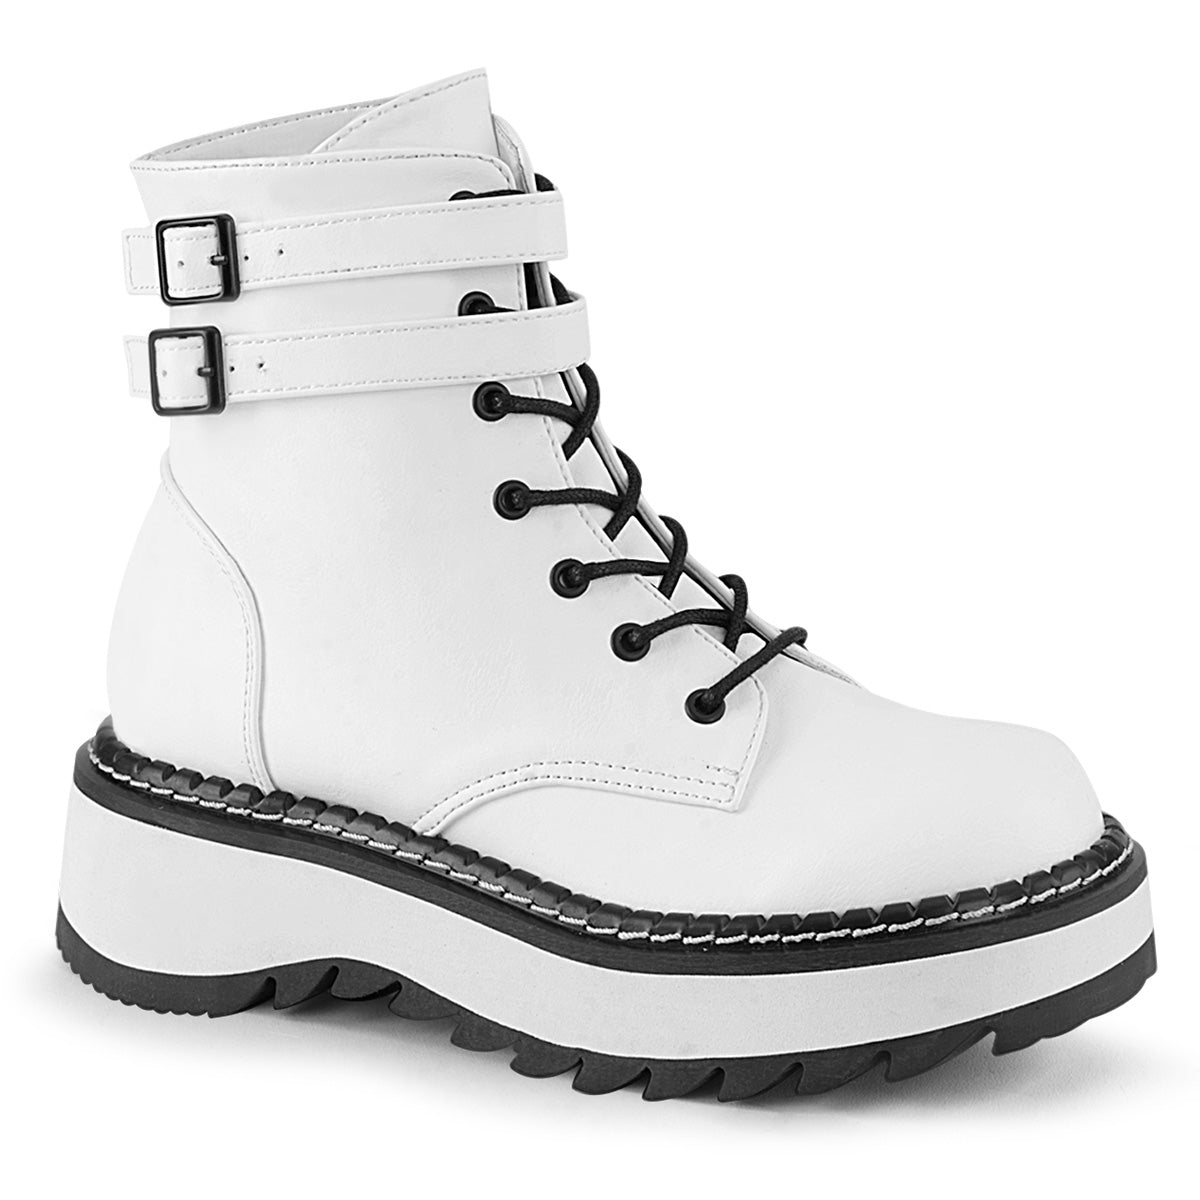 Clearance DemoniaCult Lilith 152 White Size 4UK/7USA - From Clearance Sold By Alternative Footwear